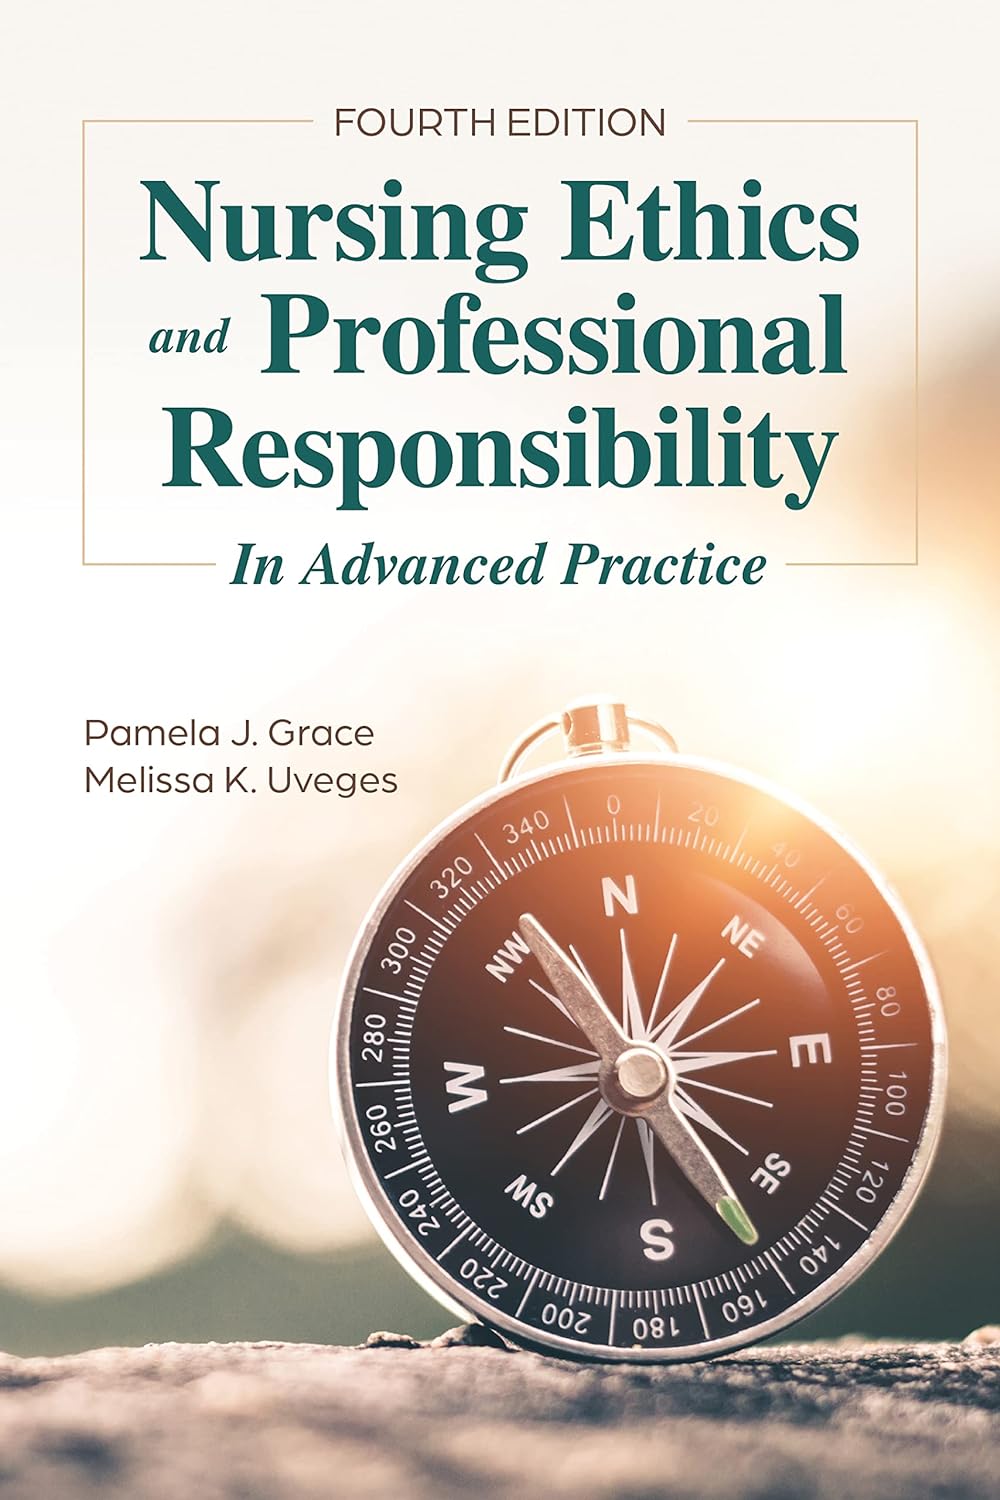 Nursing Ethics and Professional Responsibility in Advanced Practice, 4th Edition  by R.N. Grace, Pamela J., Ph.D. 